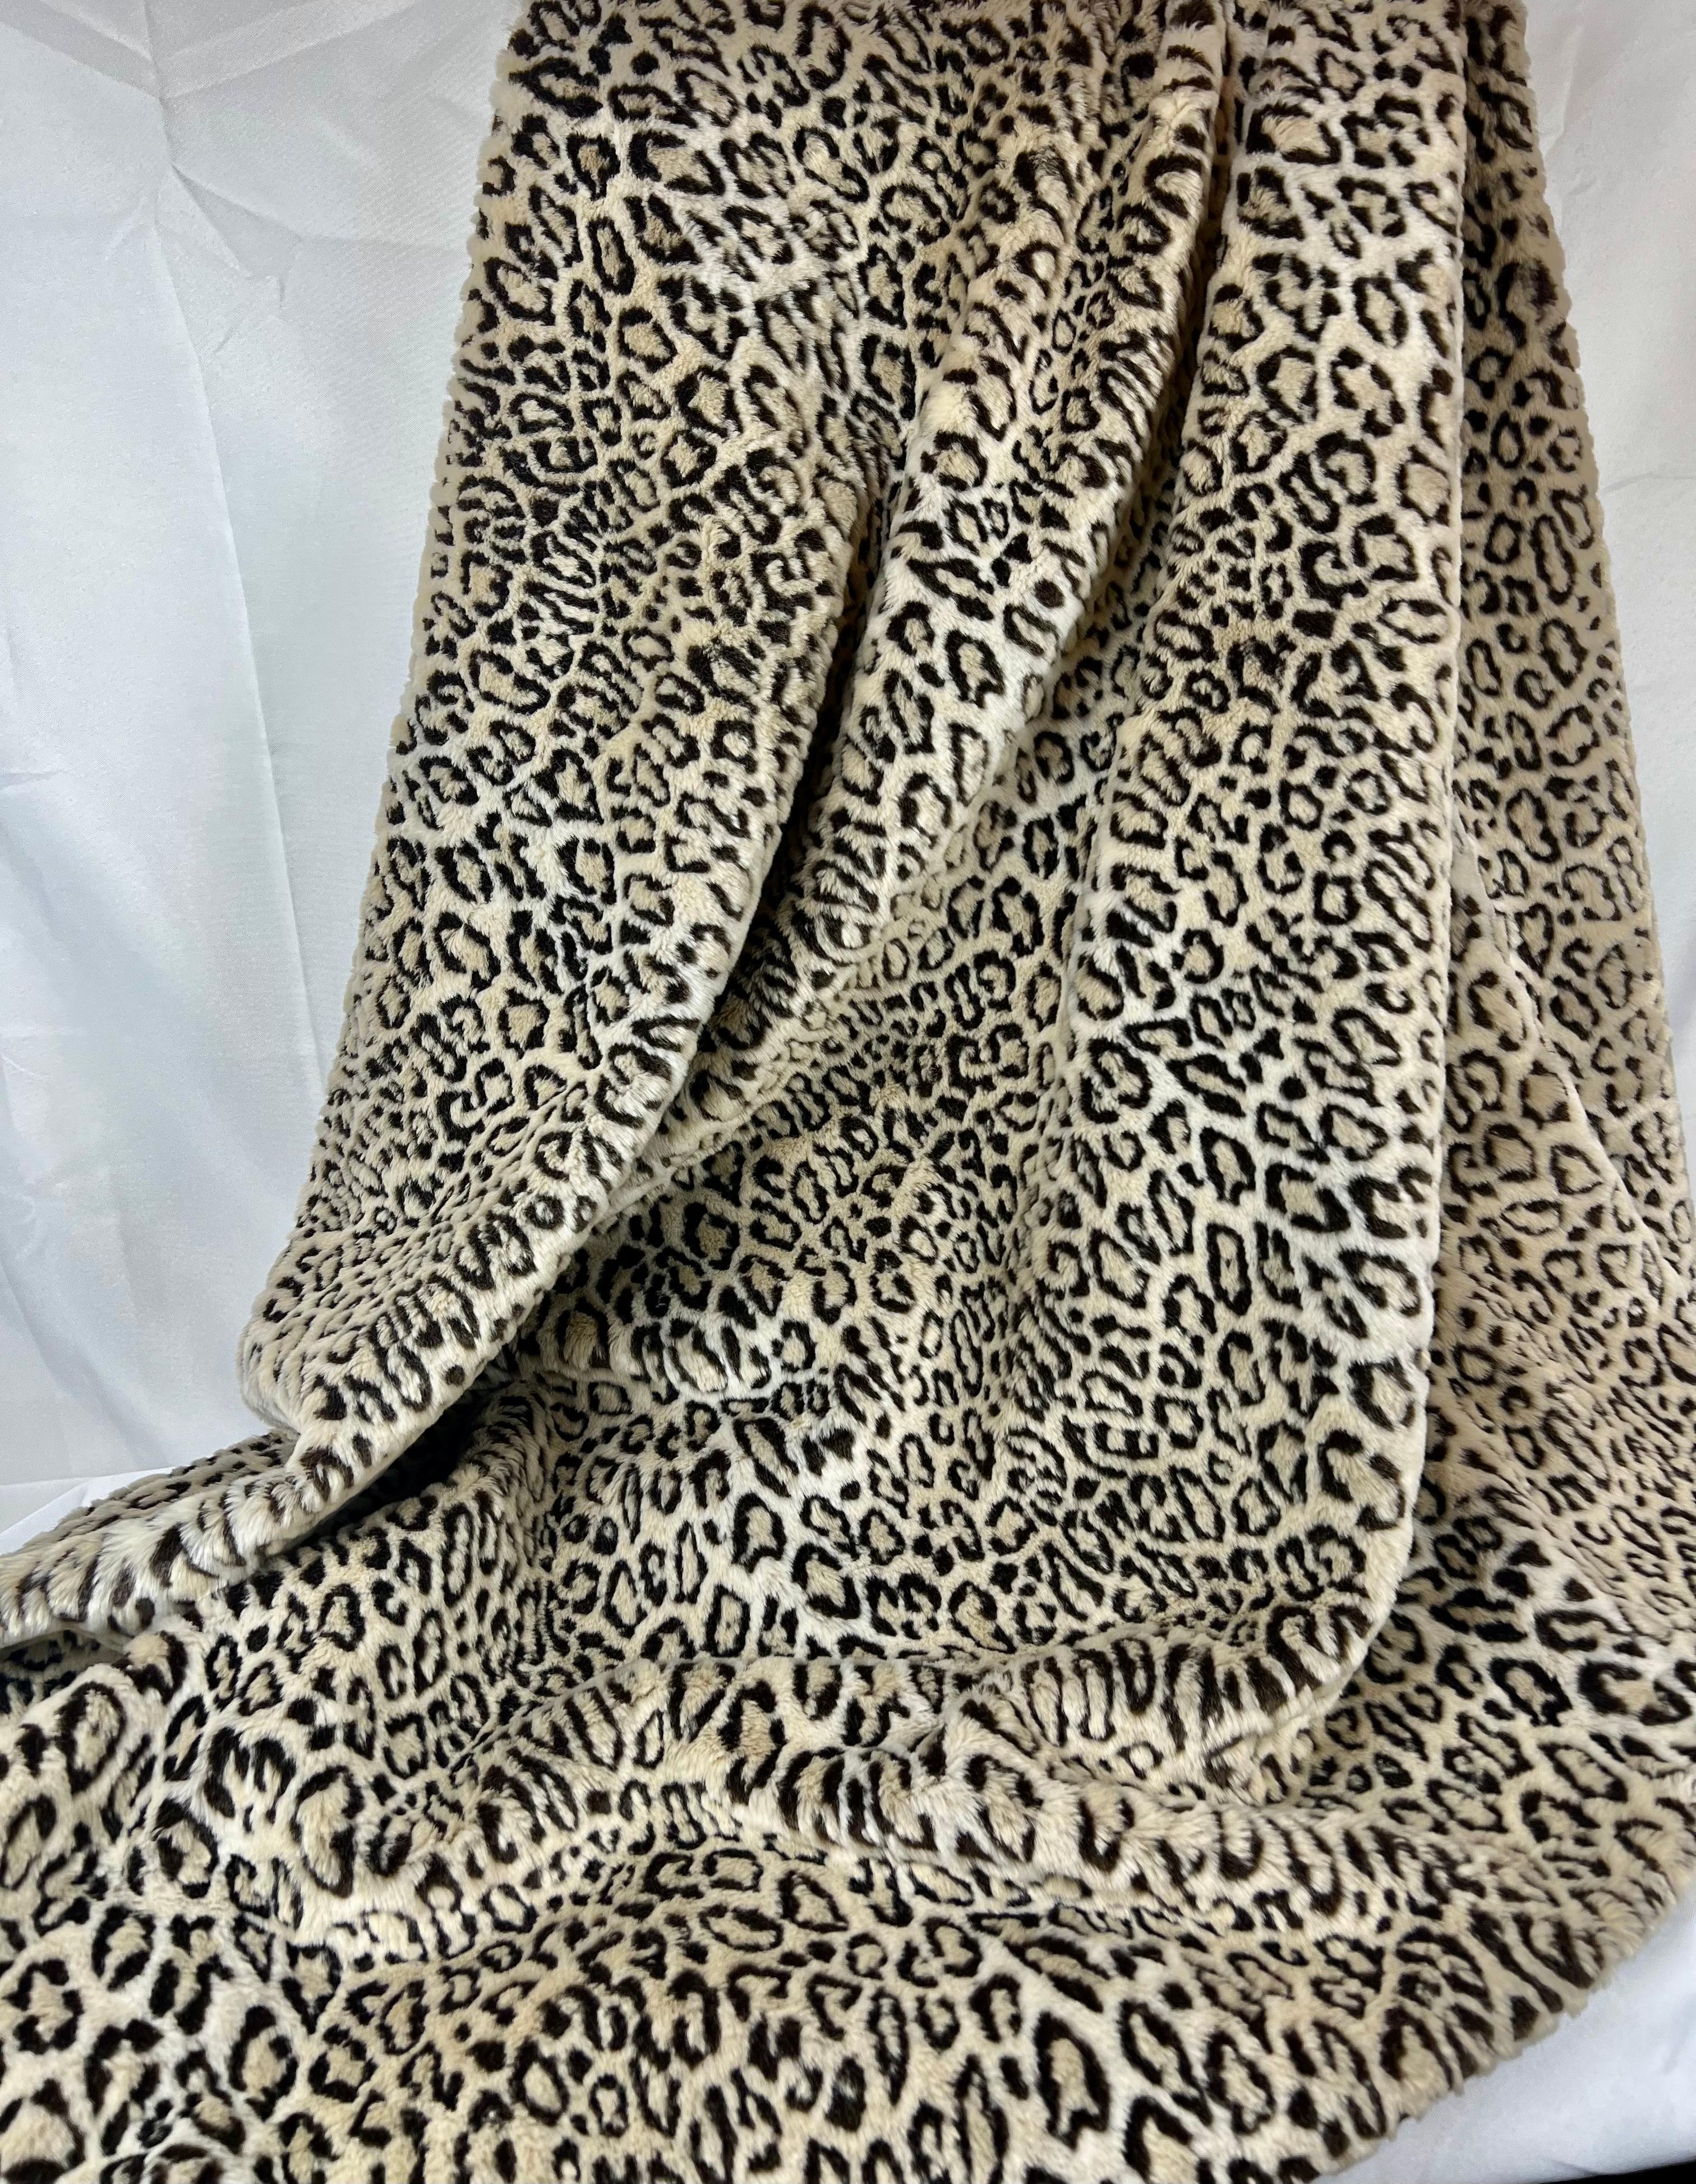 This luxurious faux snow leopard throw was created by a talented seamstress for our shop. Trimmed with a soutache type of passementerie and bullion fringe in a neutral palette. Lined with black velvet.
Dry Clean only.
L-58” x W-48